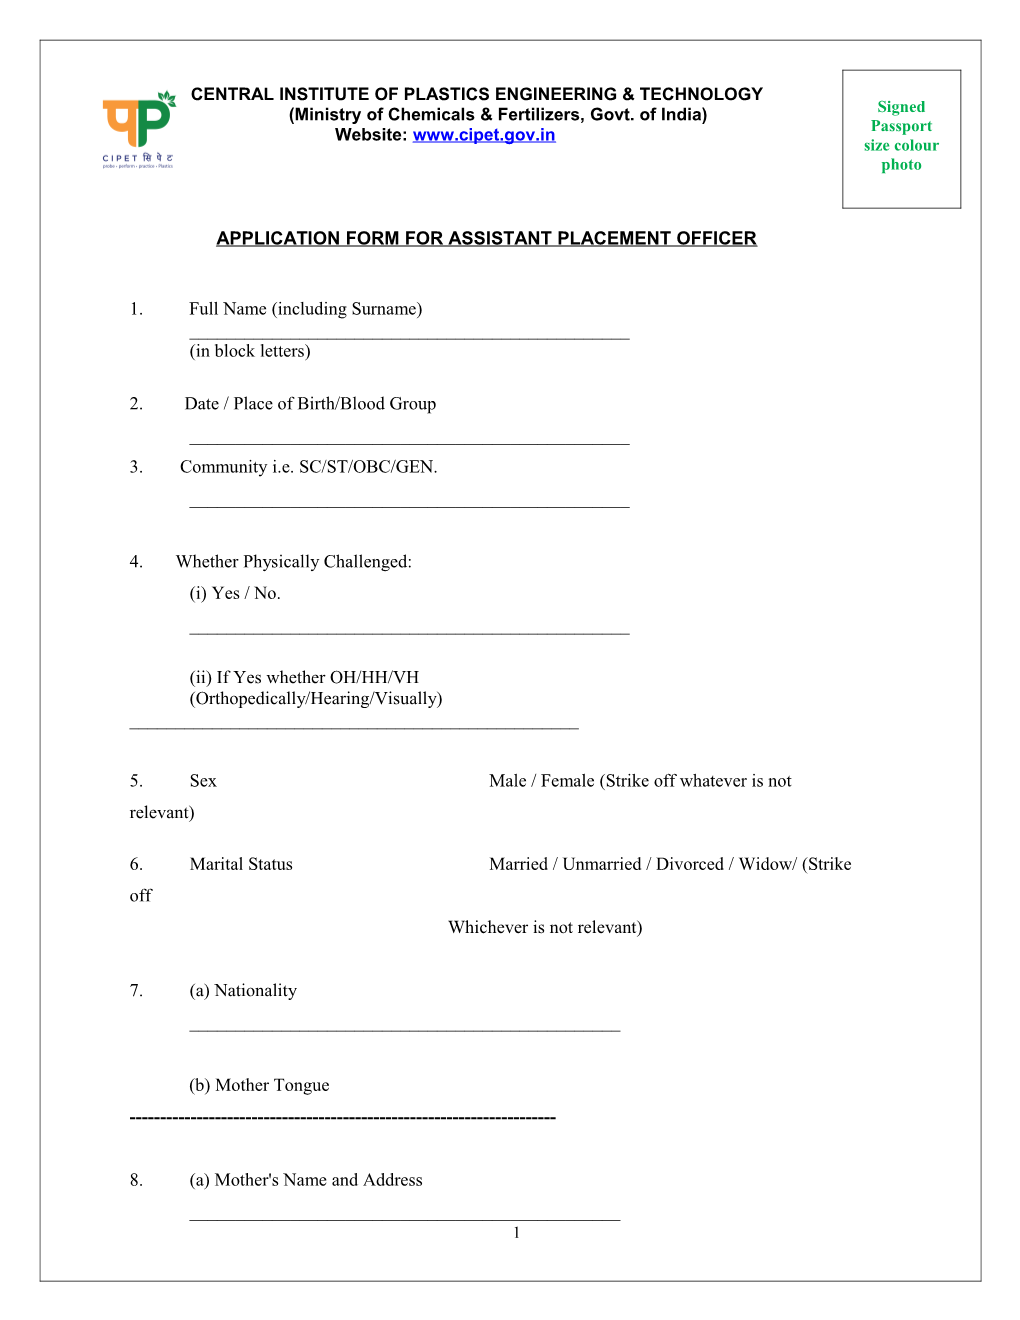 Application Form for Assistant PLACEMENT OFFICER